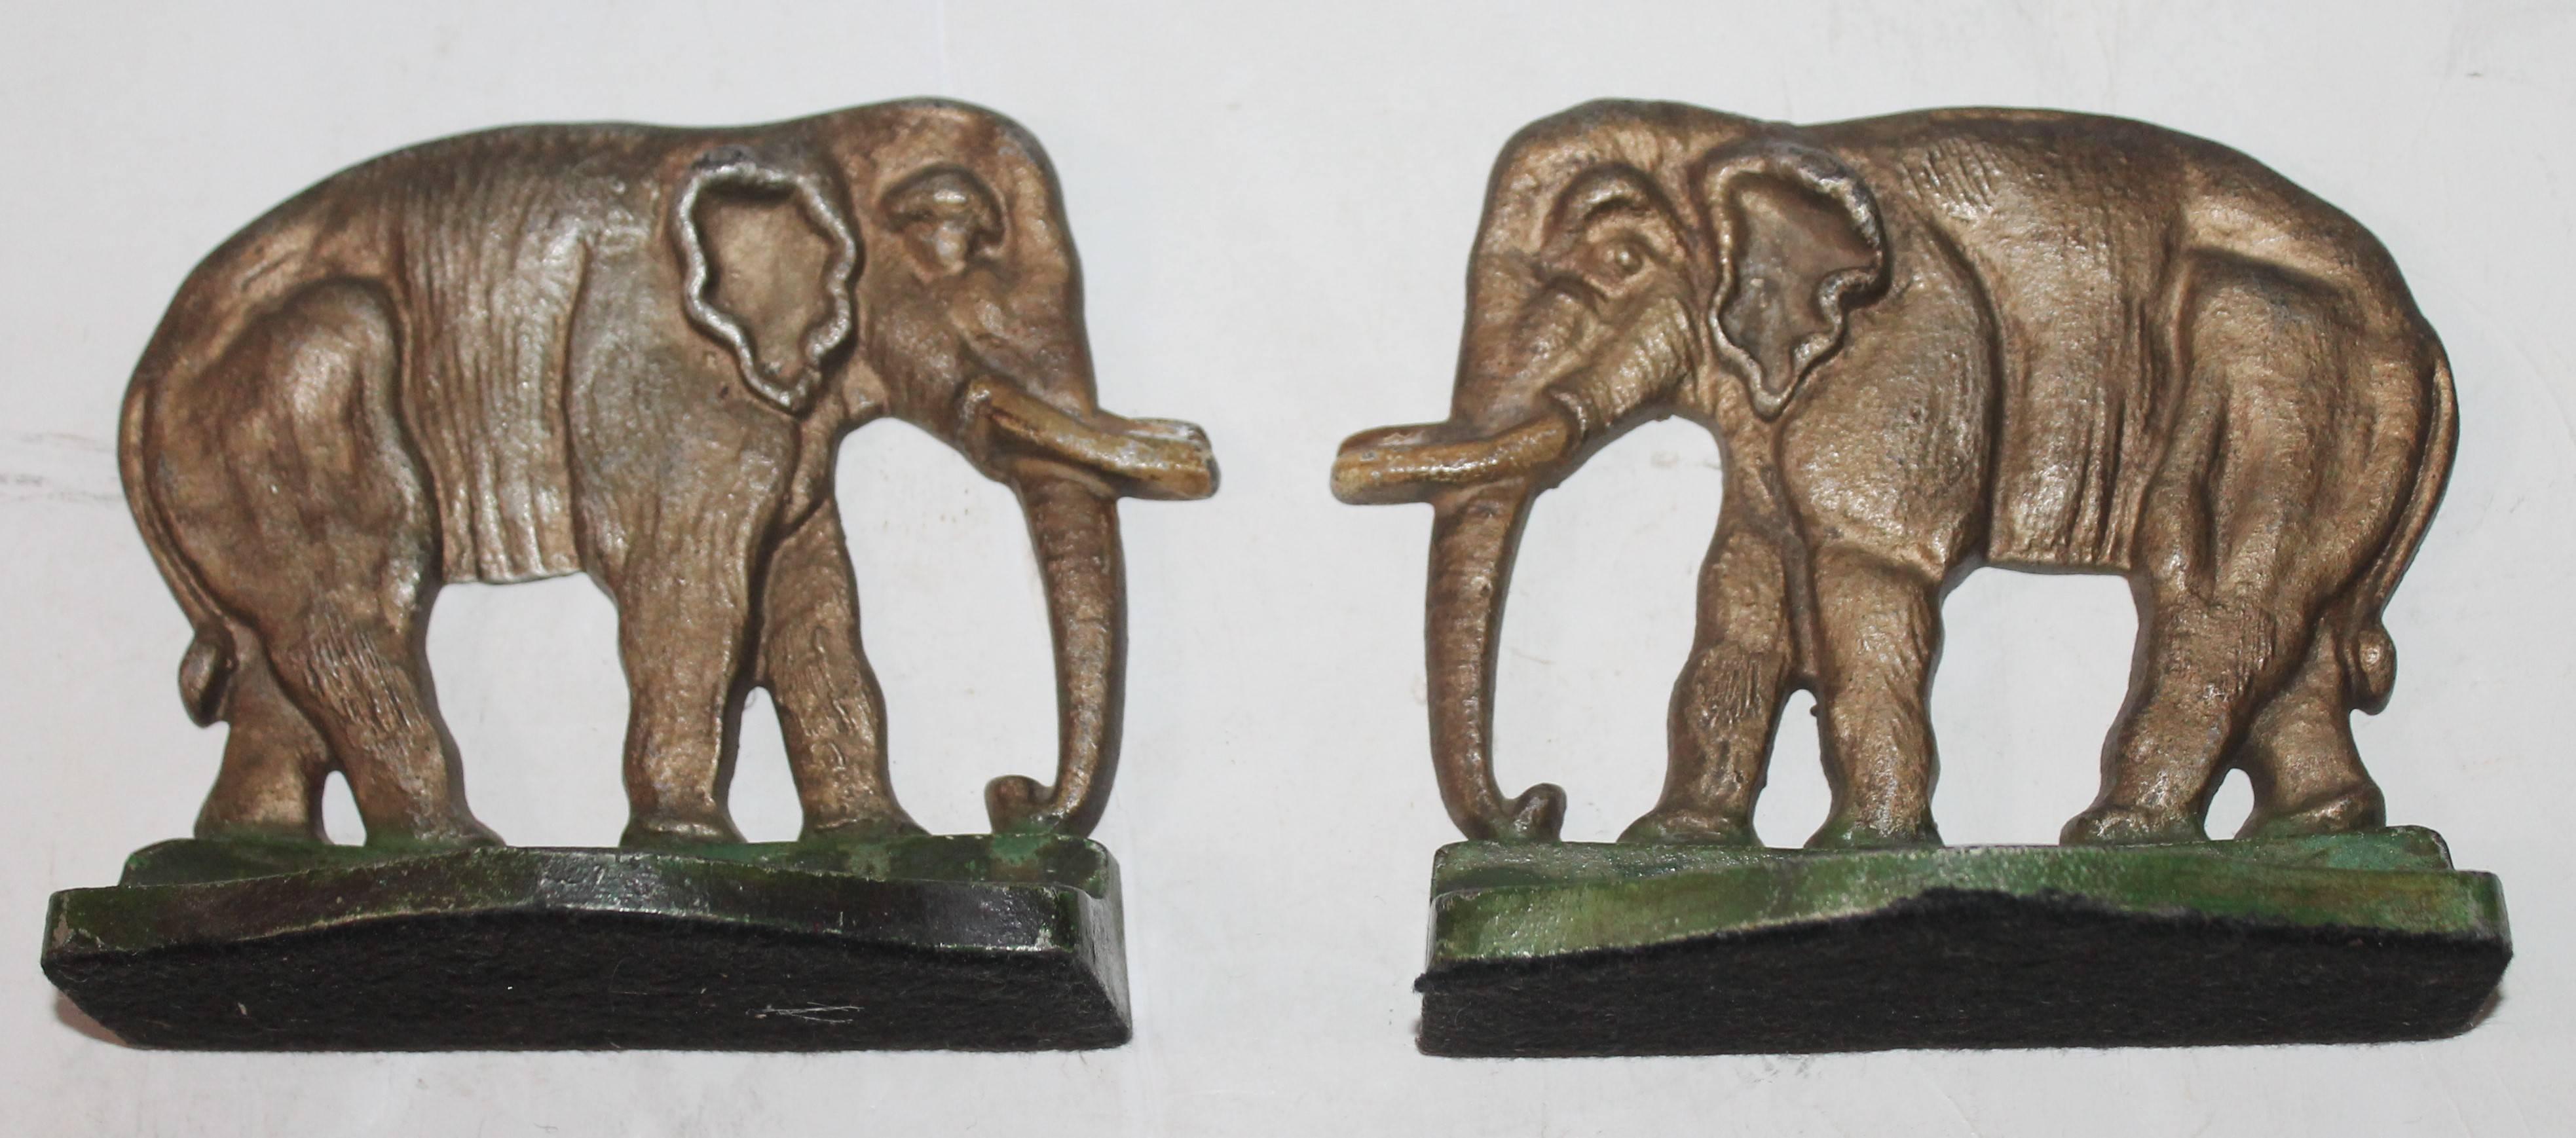 Pair of 1930s original painted cast iron elephant bookends. The condition is very good and are unsigned.